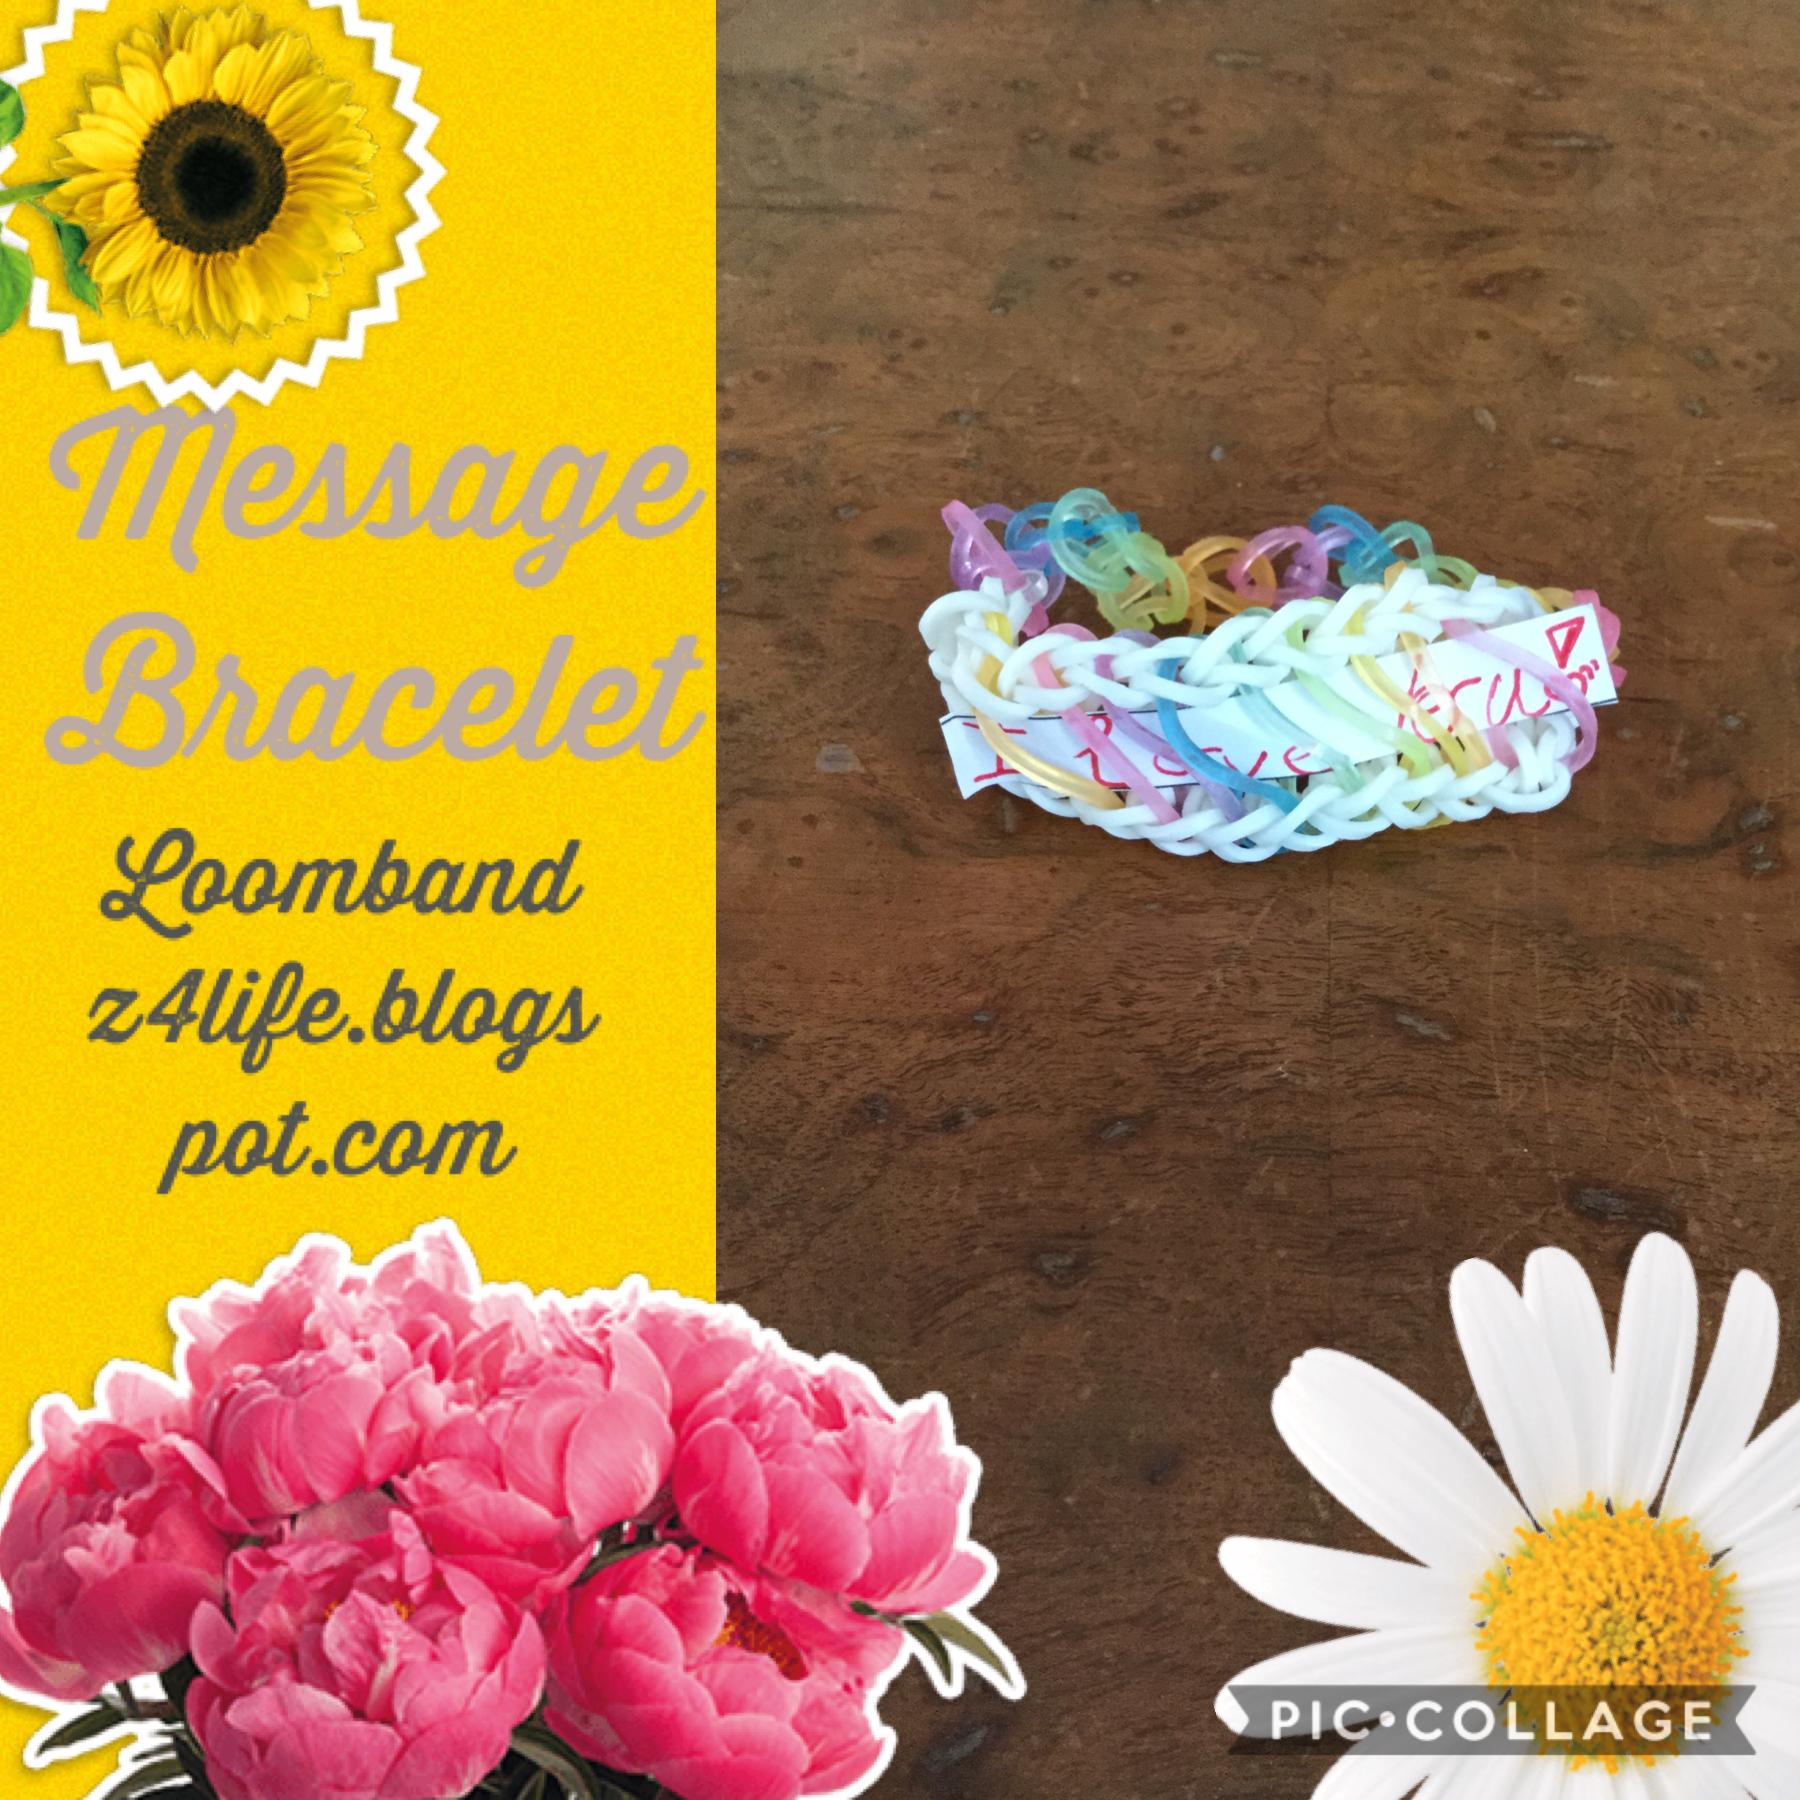 Check out my blog if you want to learn how to make more bracelets and charms out of loom bands !!!